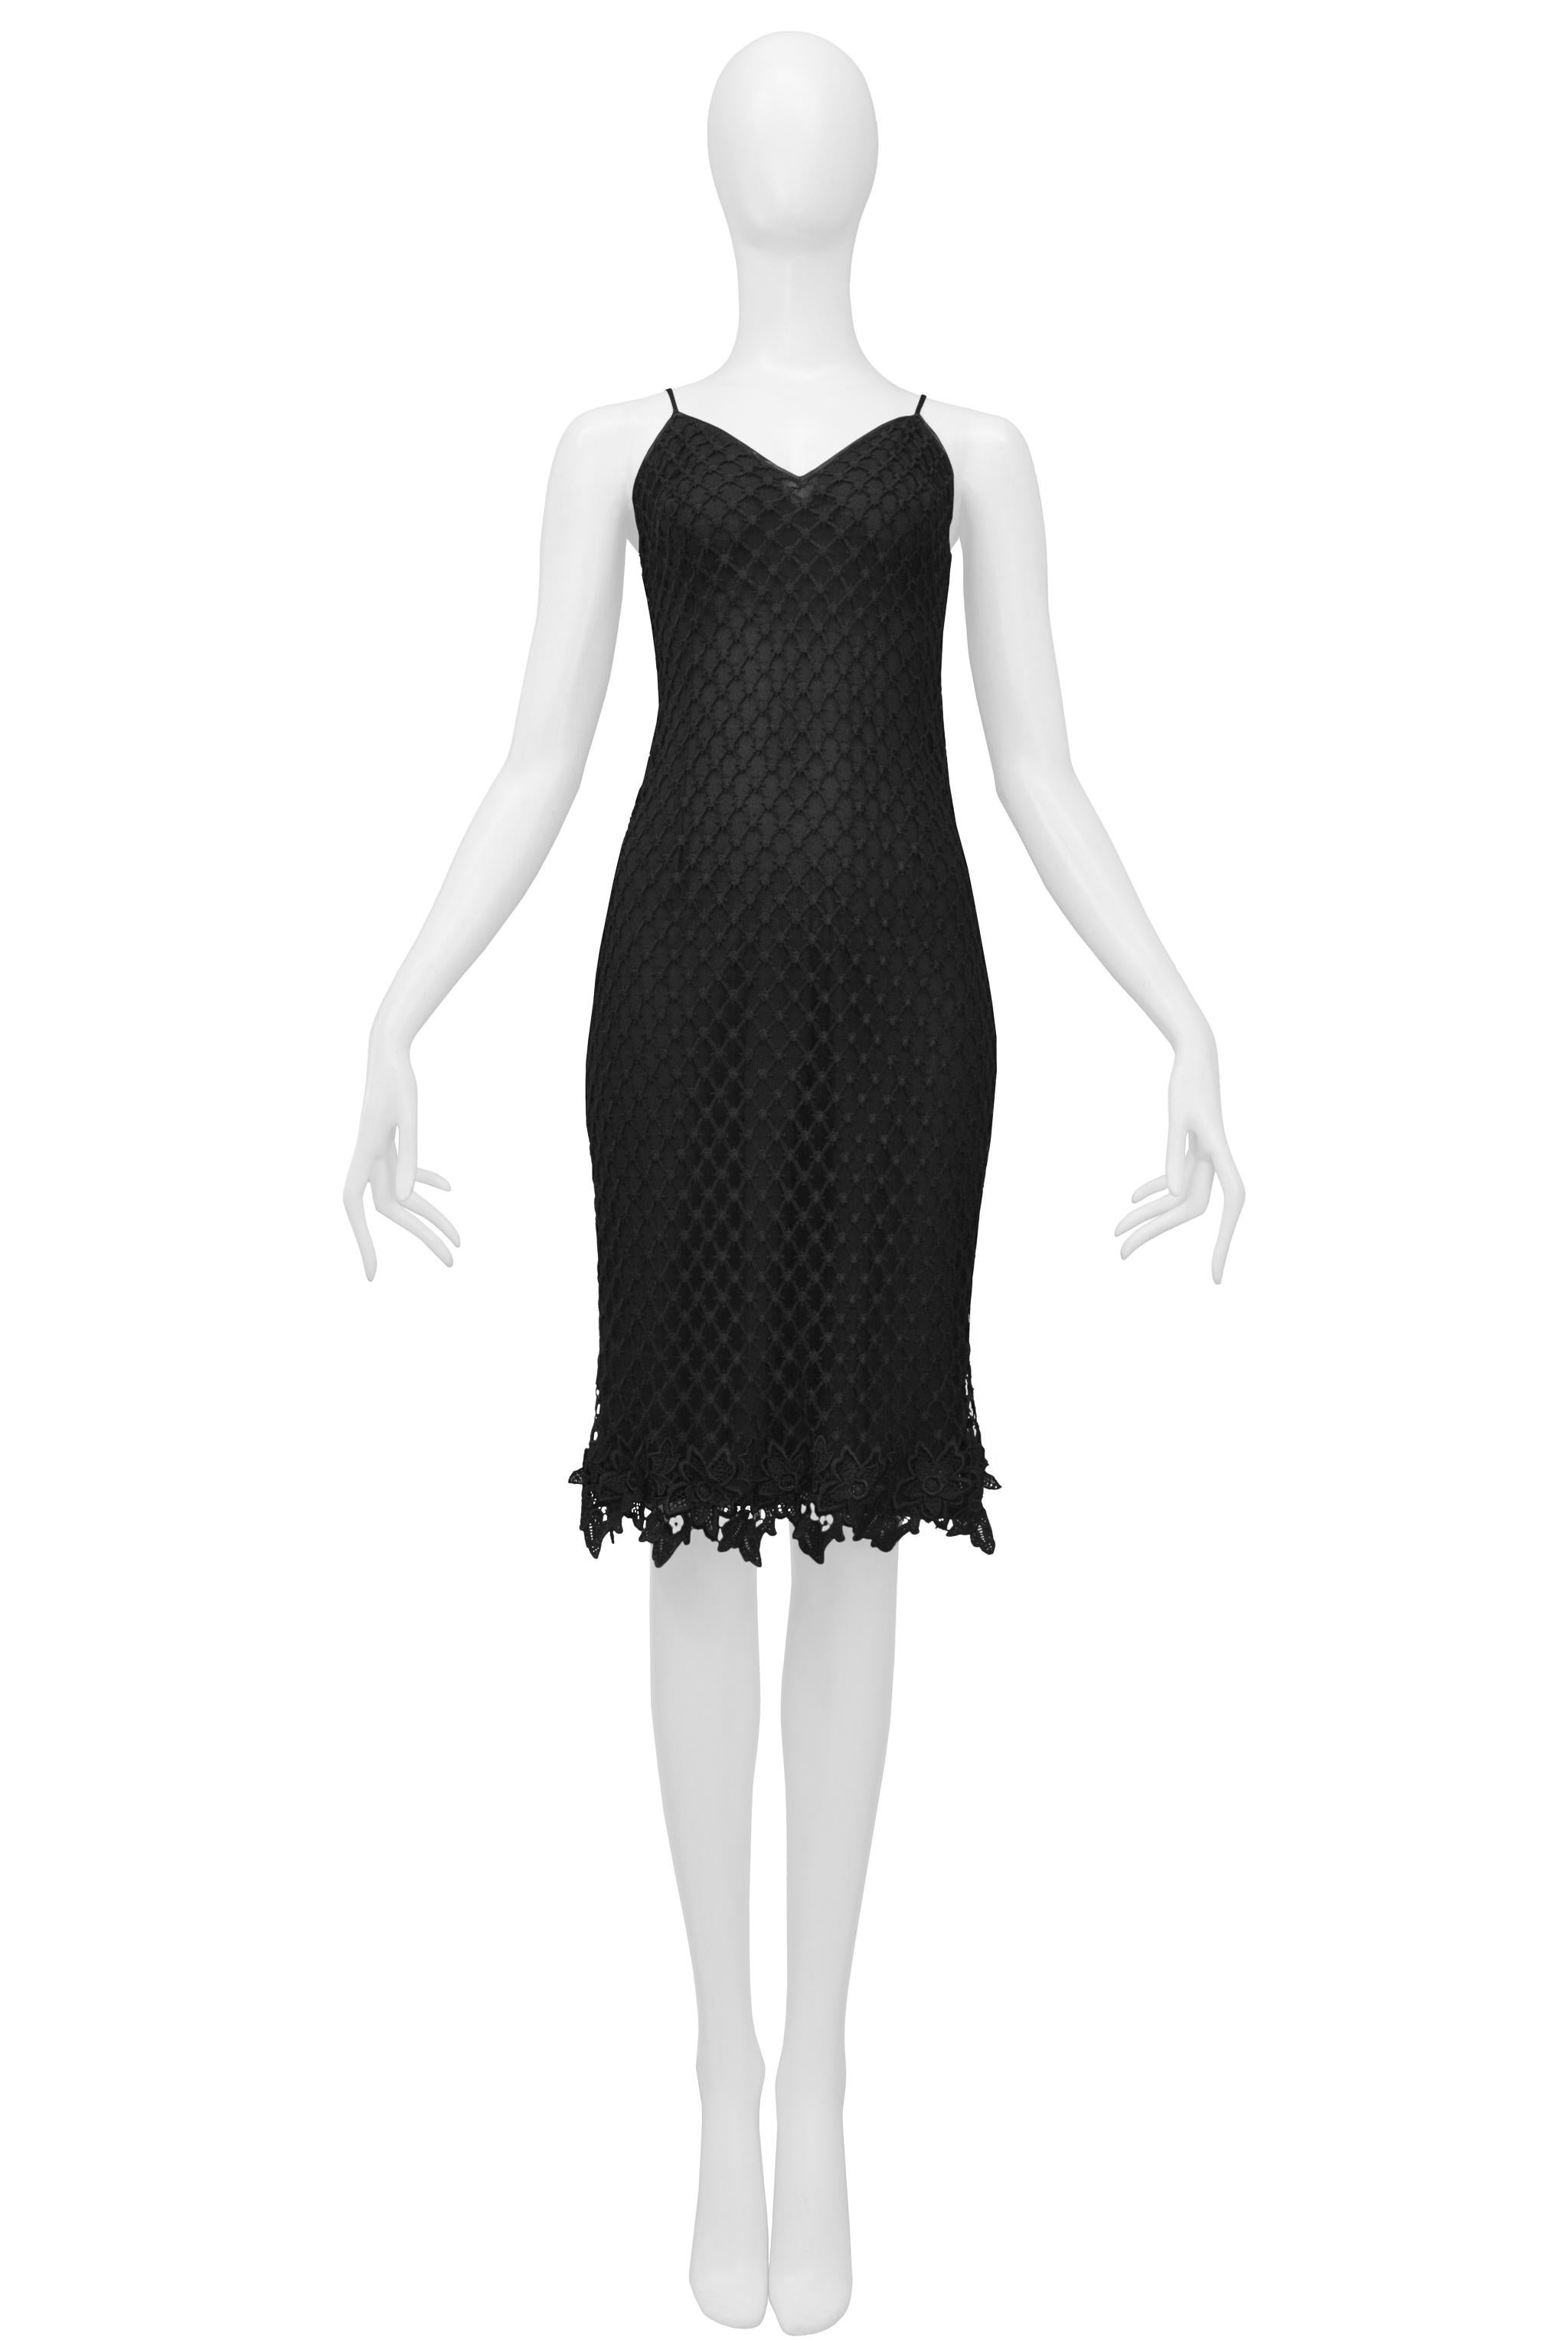 Resurrection Vintage is excited to offer a vintage Dolce & Gabbana black slip dress featuring a fishnet overlay, attached under slip, skinny straps, lace trim, and knee-length. 

Dolce & Gabbana
Size 42
Viscose 
Excellent Vintage Condition